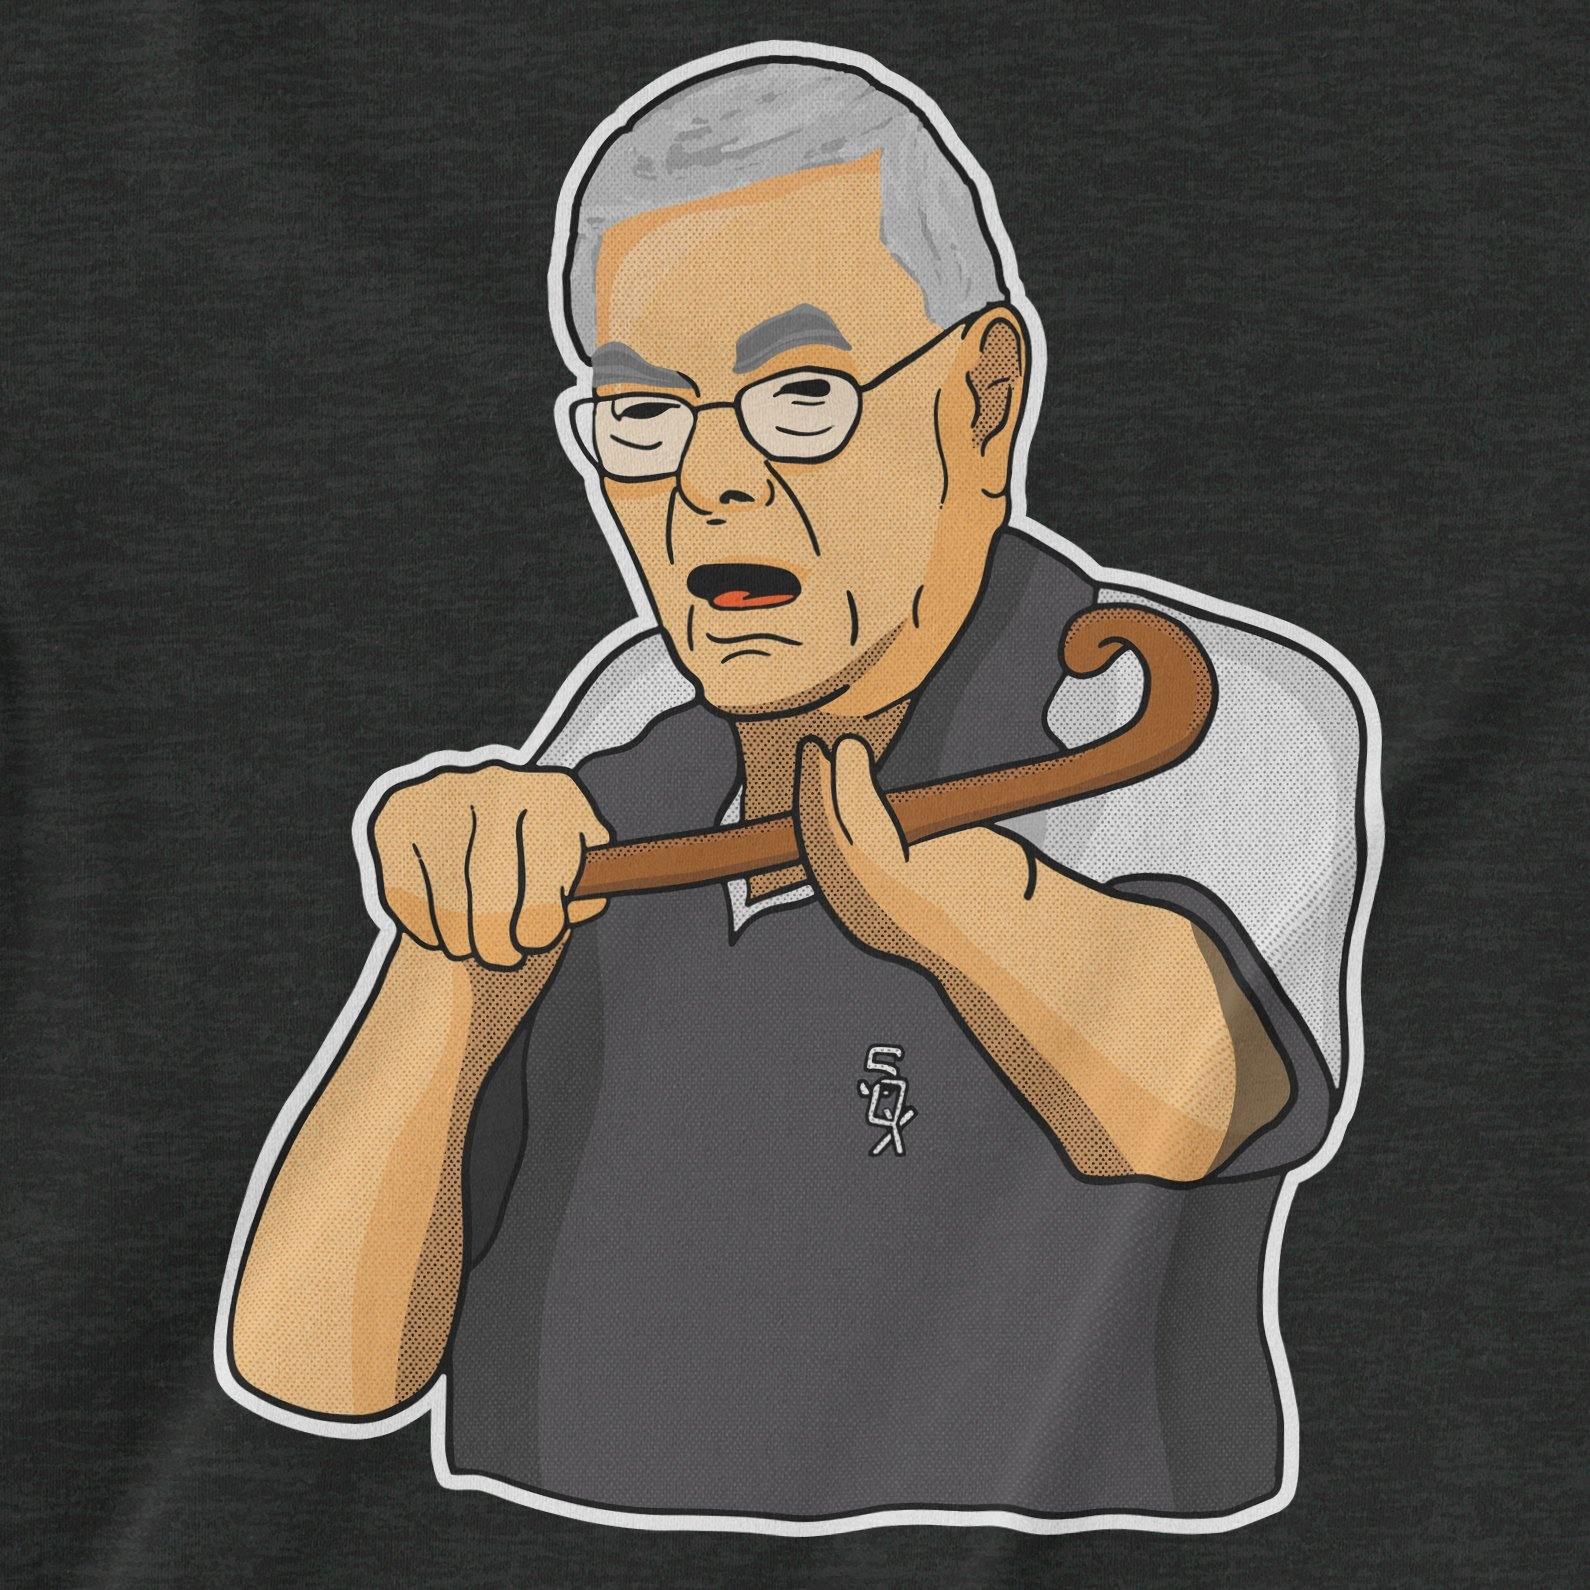 The Wizard Of The South Side | T-Shirt - Jomboy Media